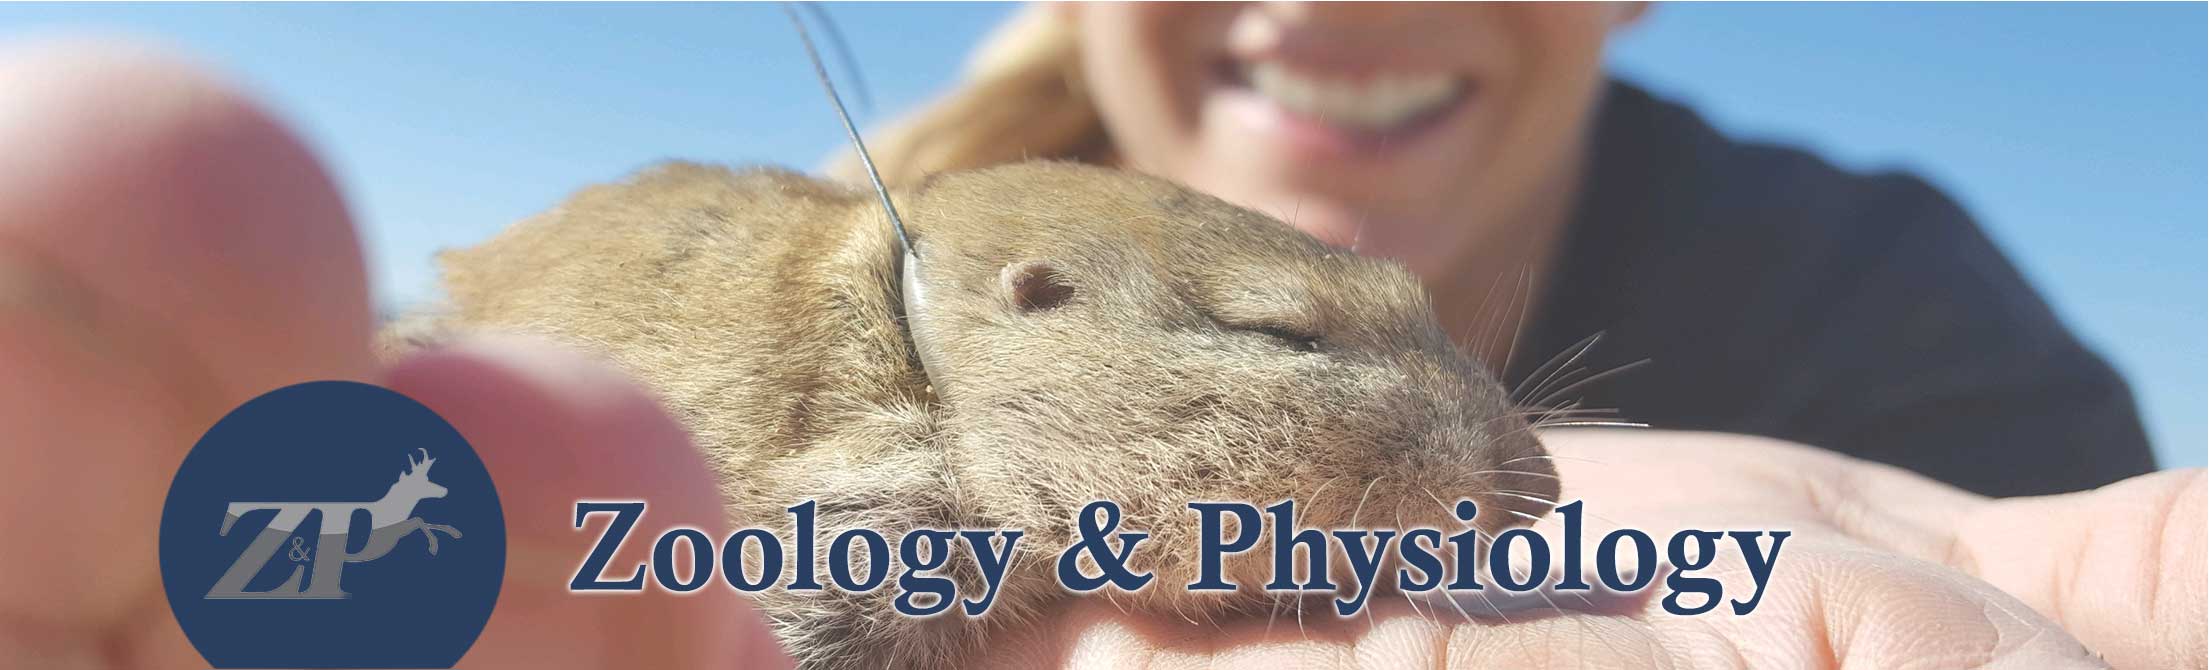 Department of Zoology & Physiology